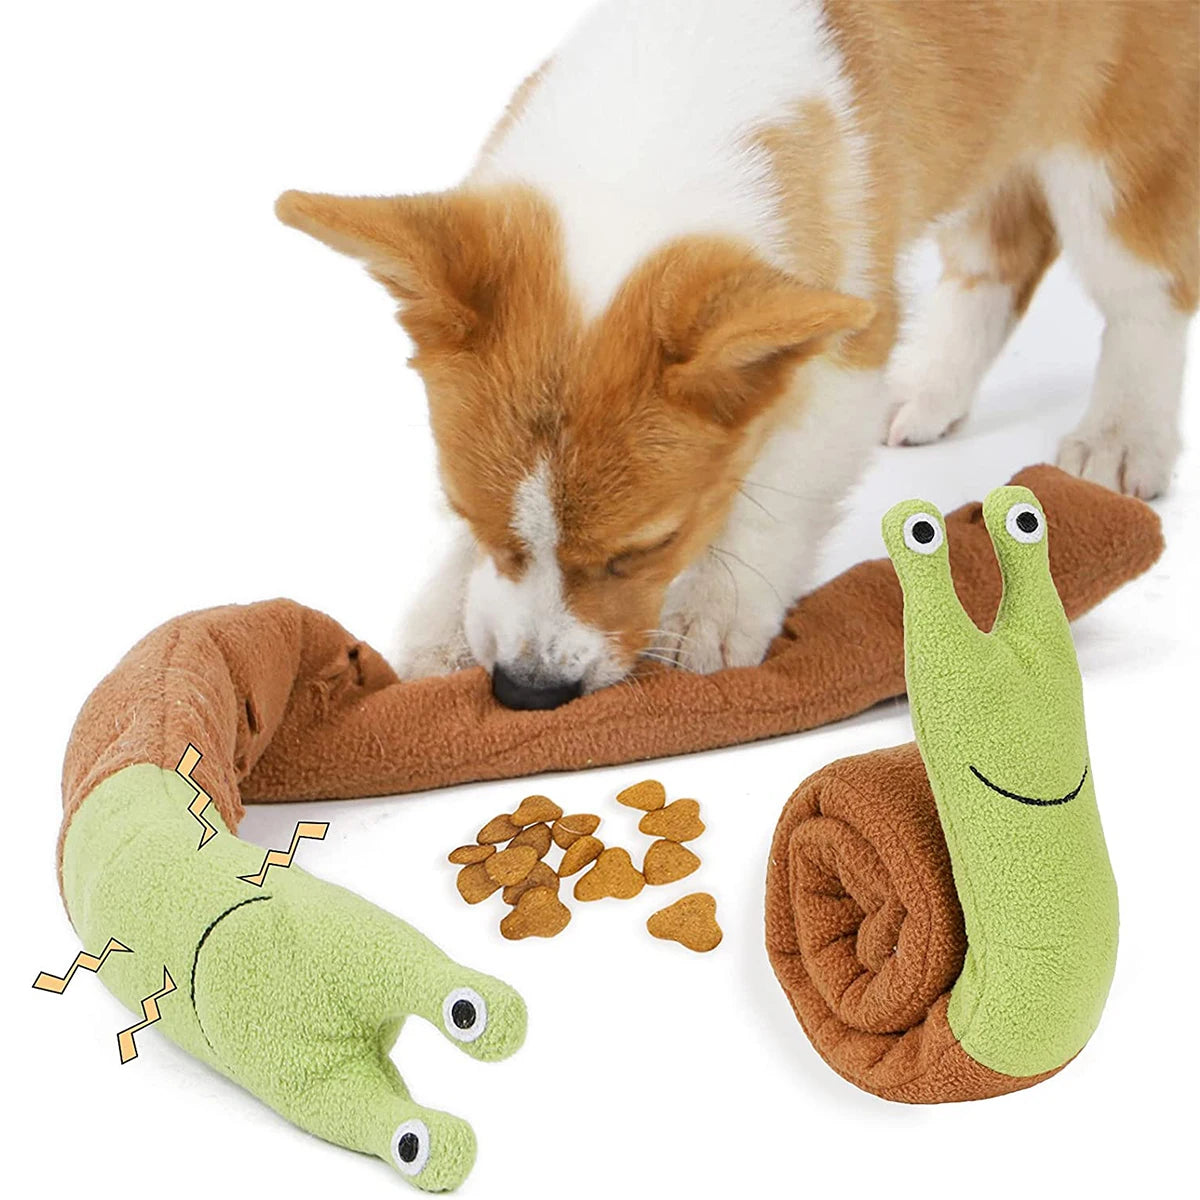 Pet Sniff Squeaky Dog Toy: Interactive Foraging & Training - Soft Teething Aid  petlums.com Default Title  